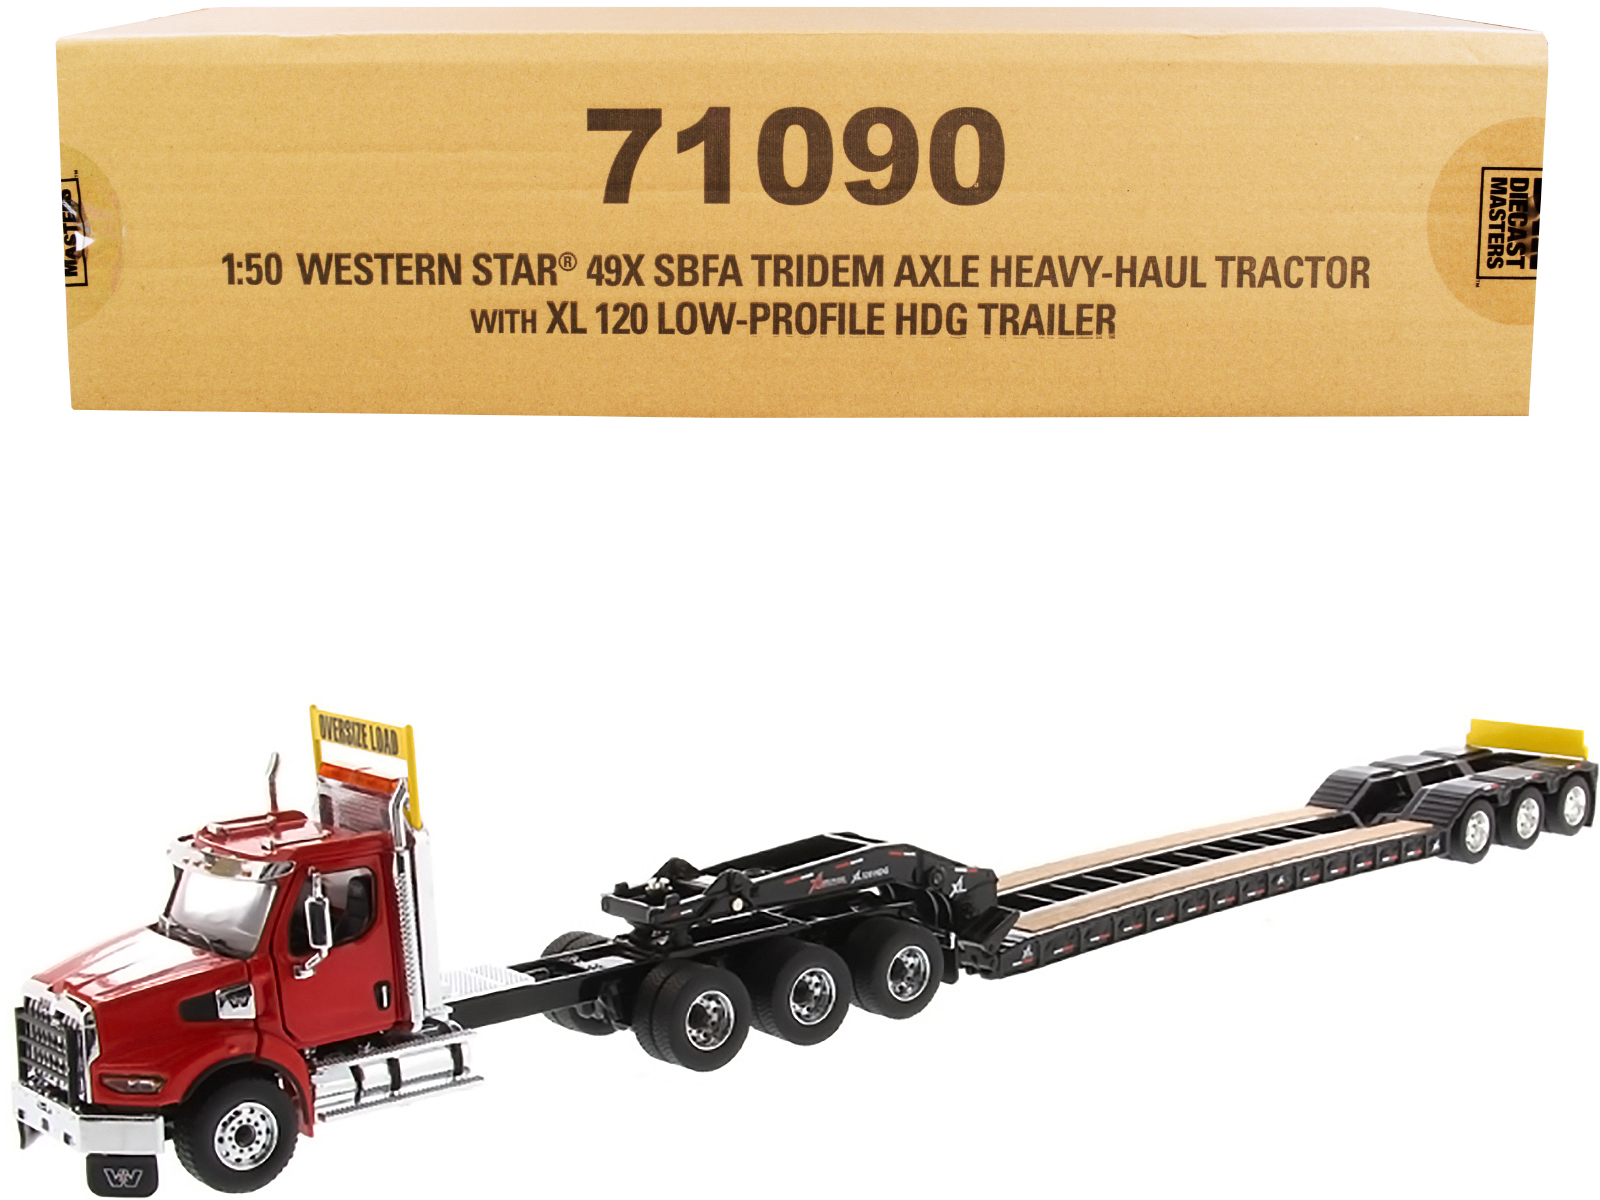 DieCast Masters Western Star 49X SBFA Tridem Axle Heavy-Haul Tractor w/Low-Profile HDG Trailer Red and Black 1/50 Diecast Model Diecast Masters